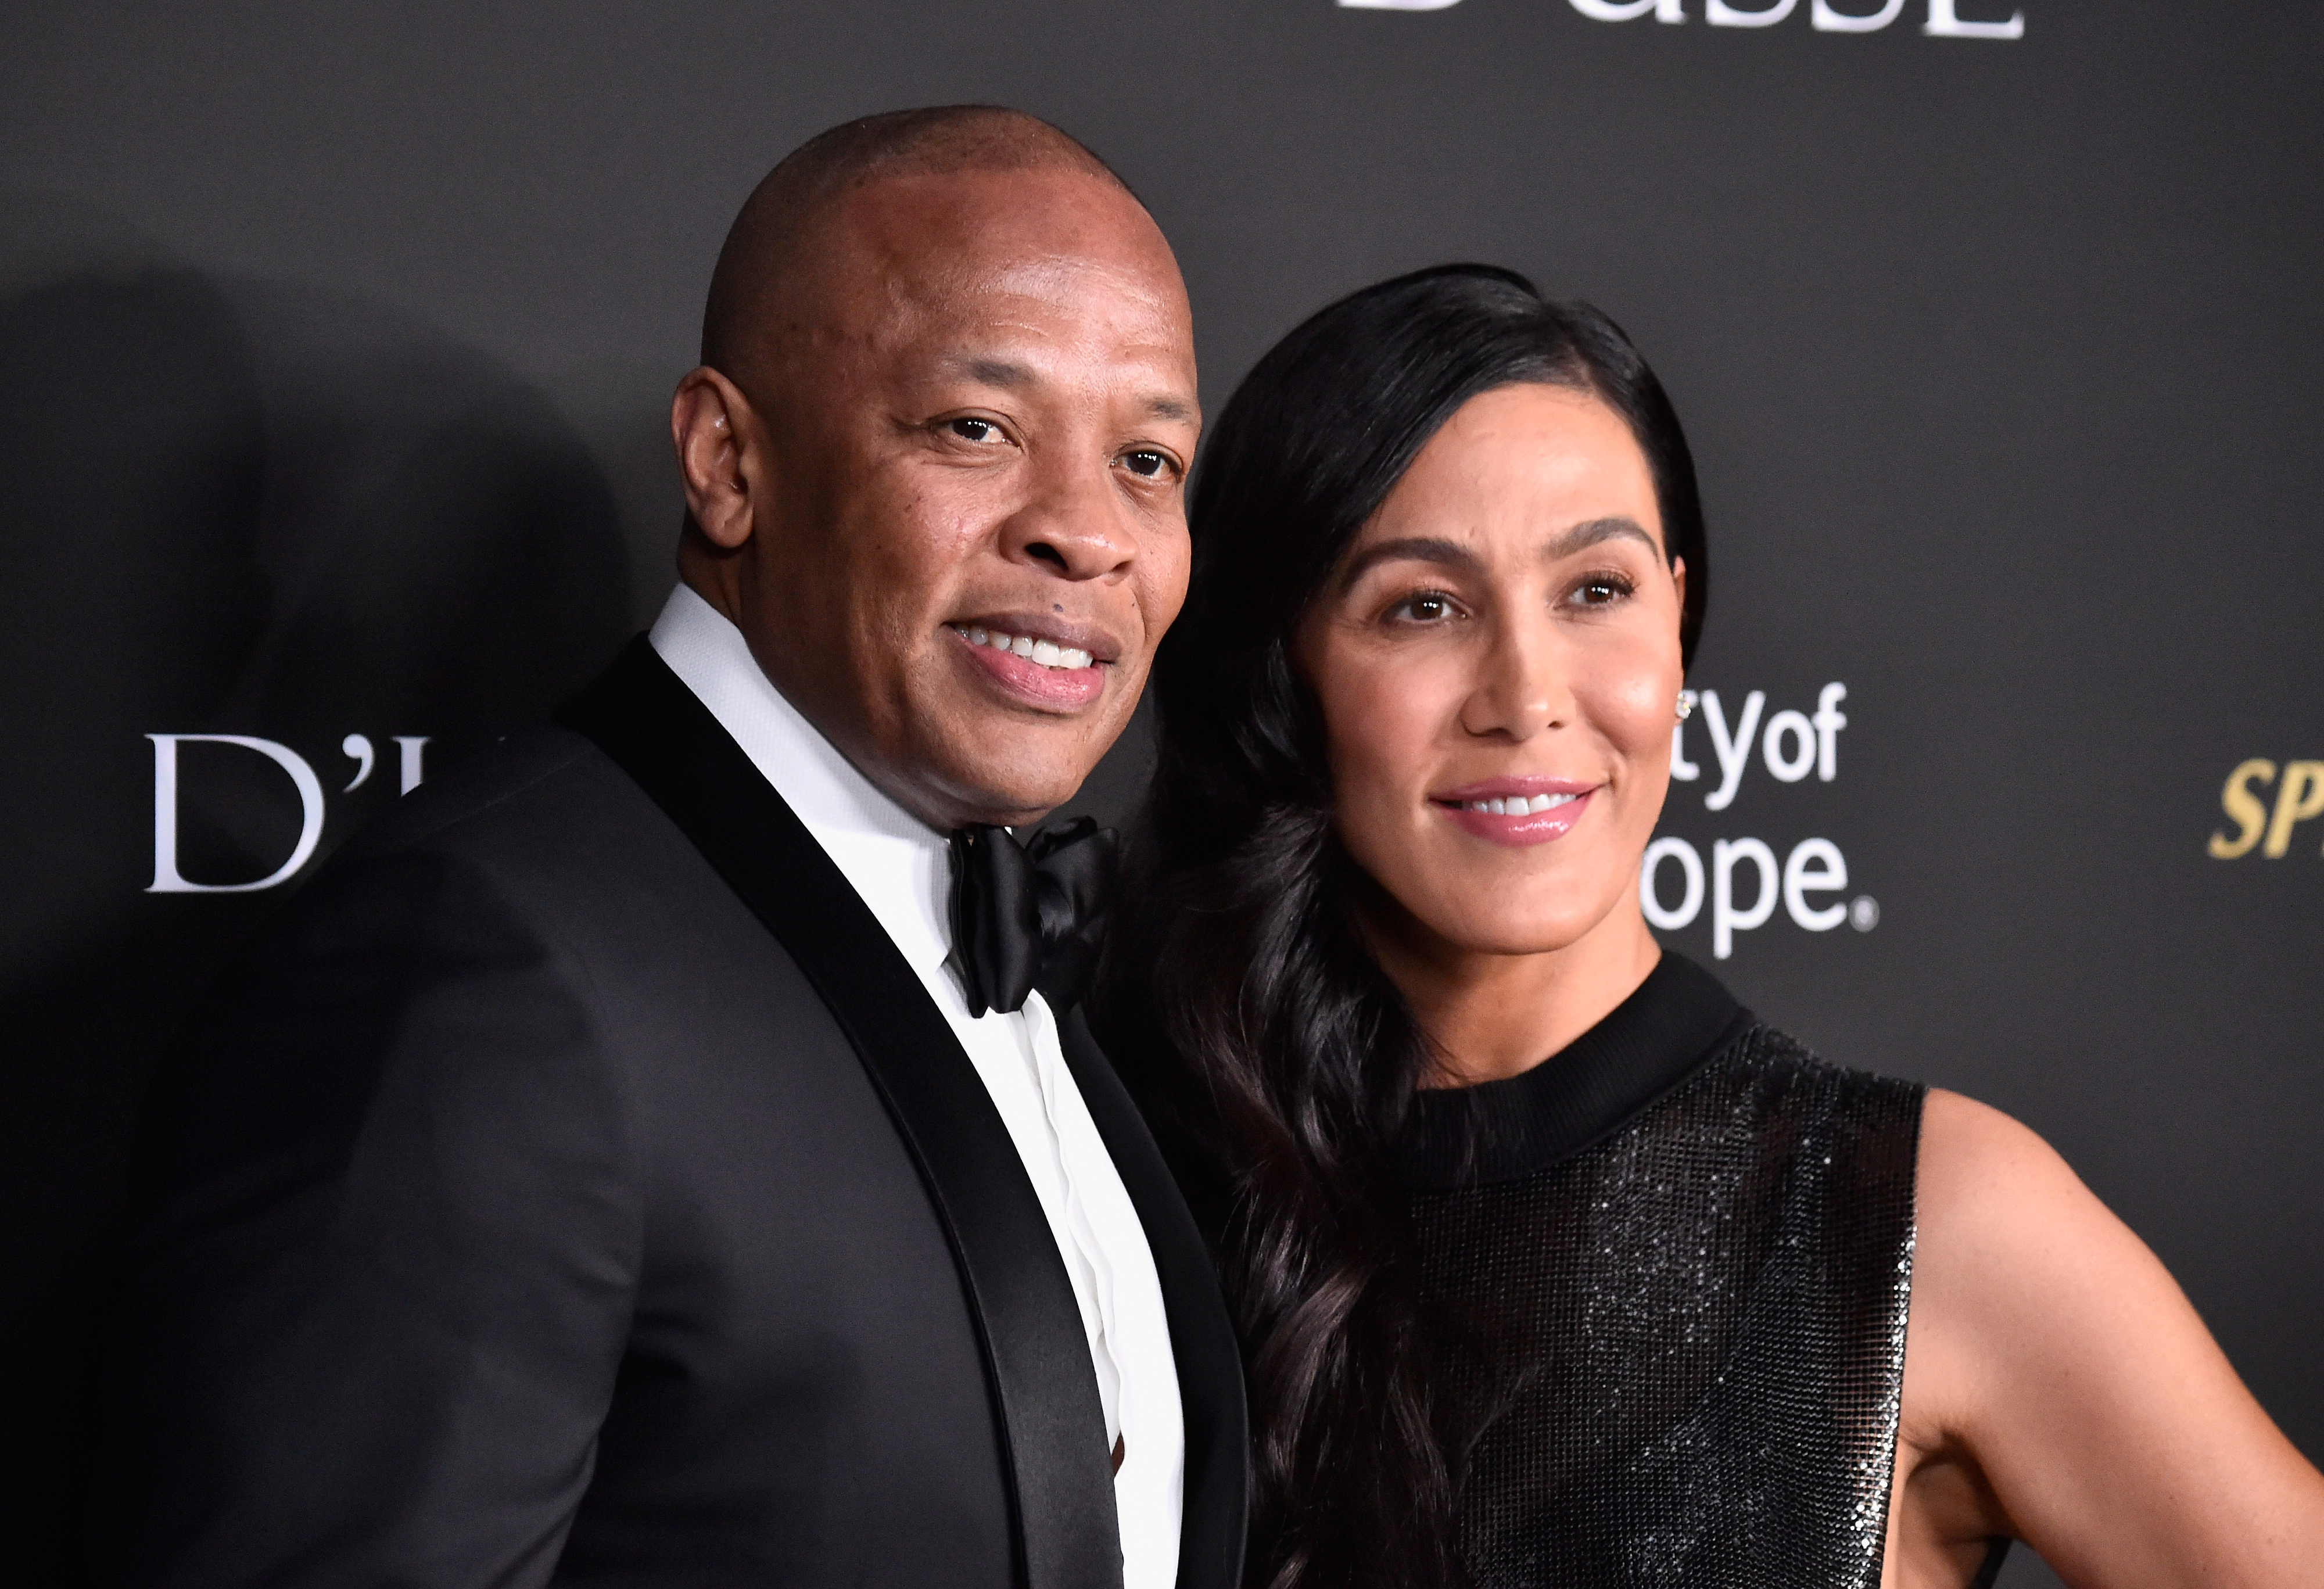 Dr. Dre (L) and Nicole Young attend the City of Hope Spirit of Life Gala 2018